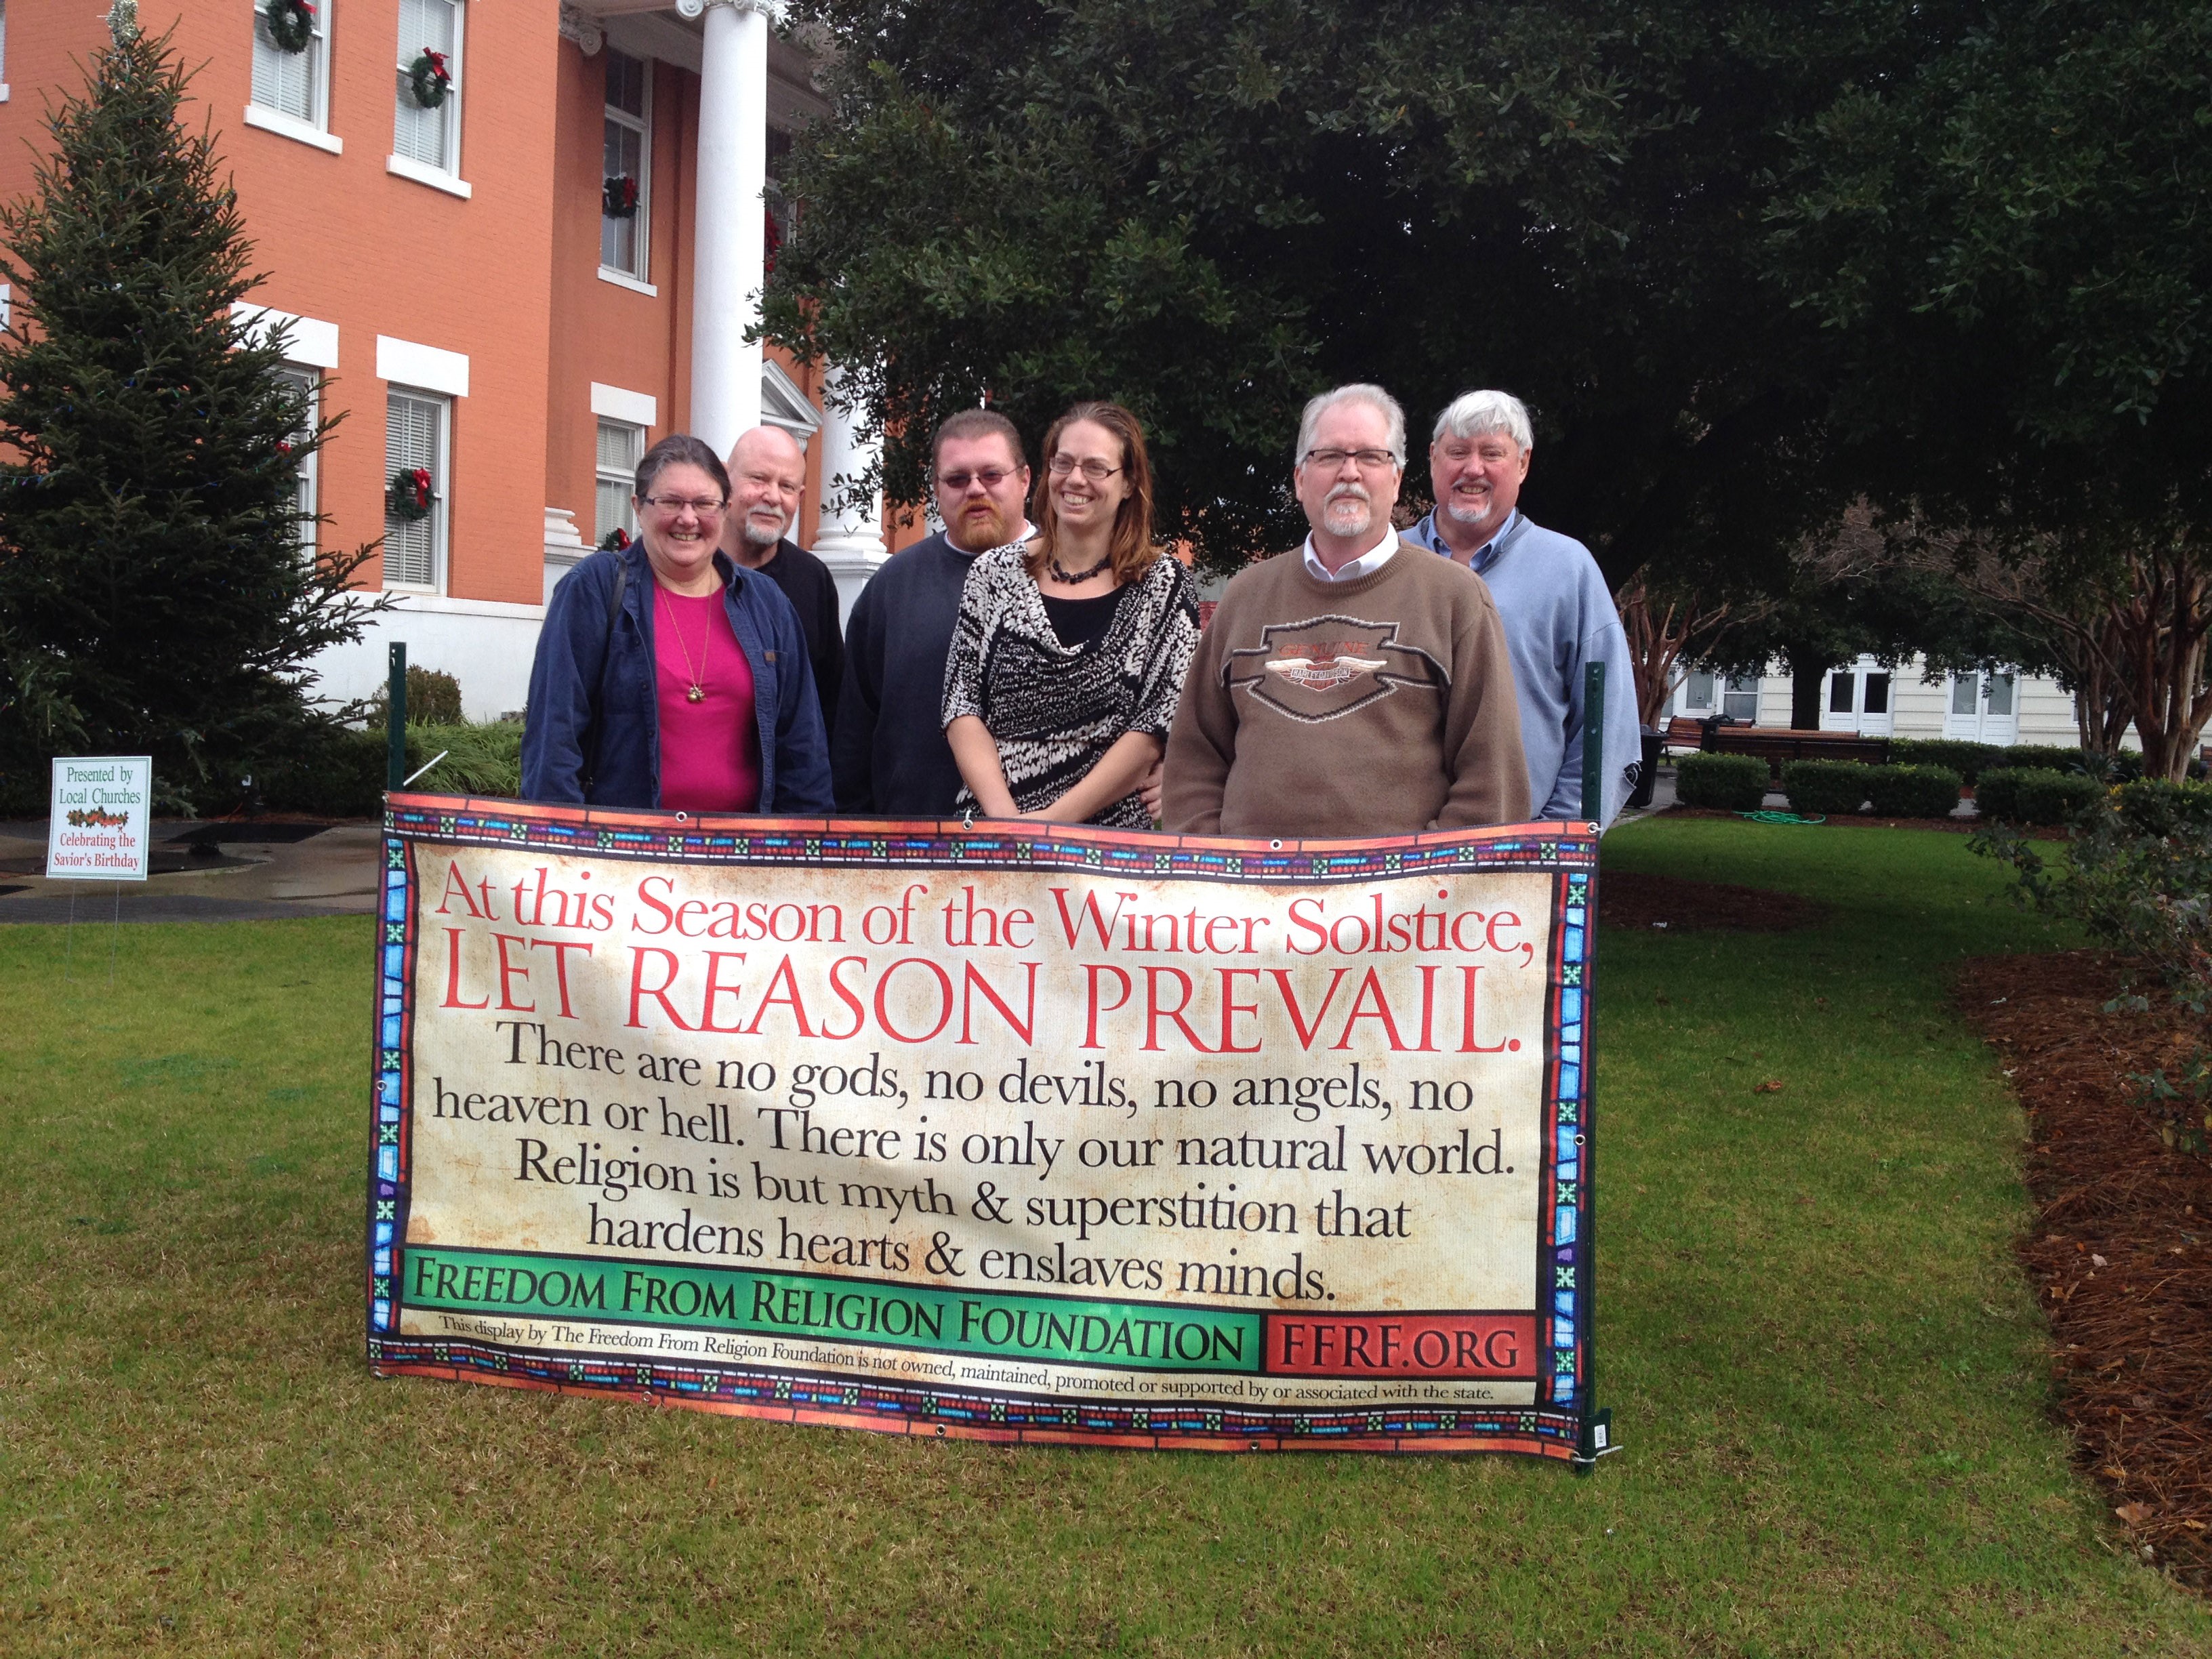 FFRF members place a banner in Bulloch County, Georgia